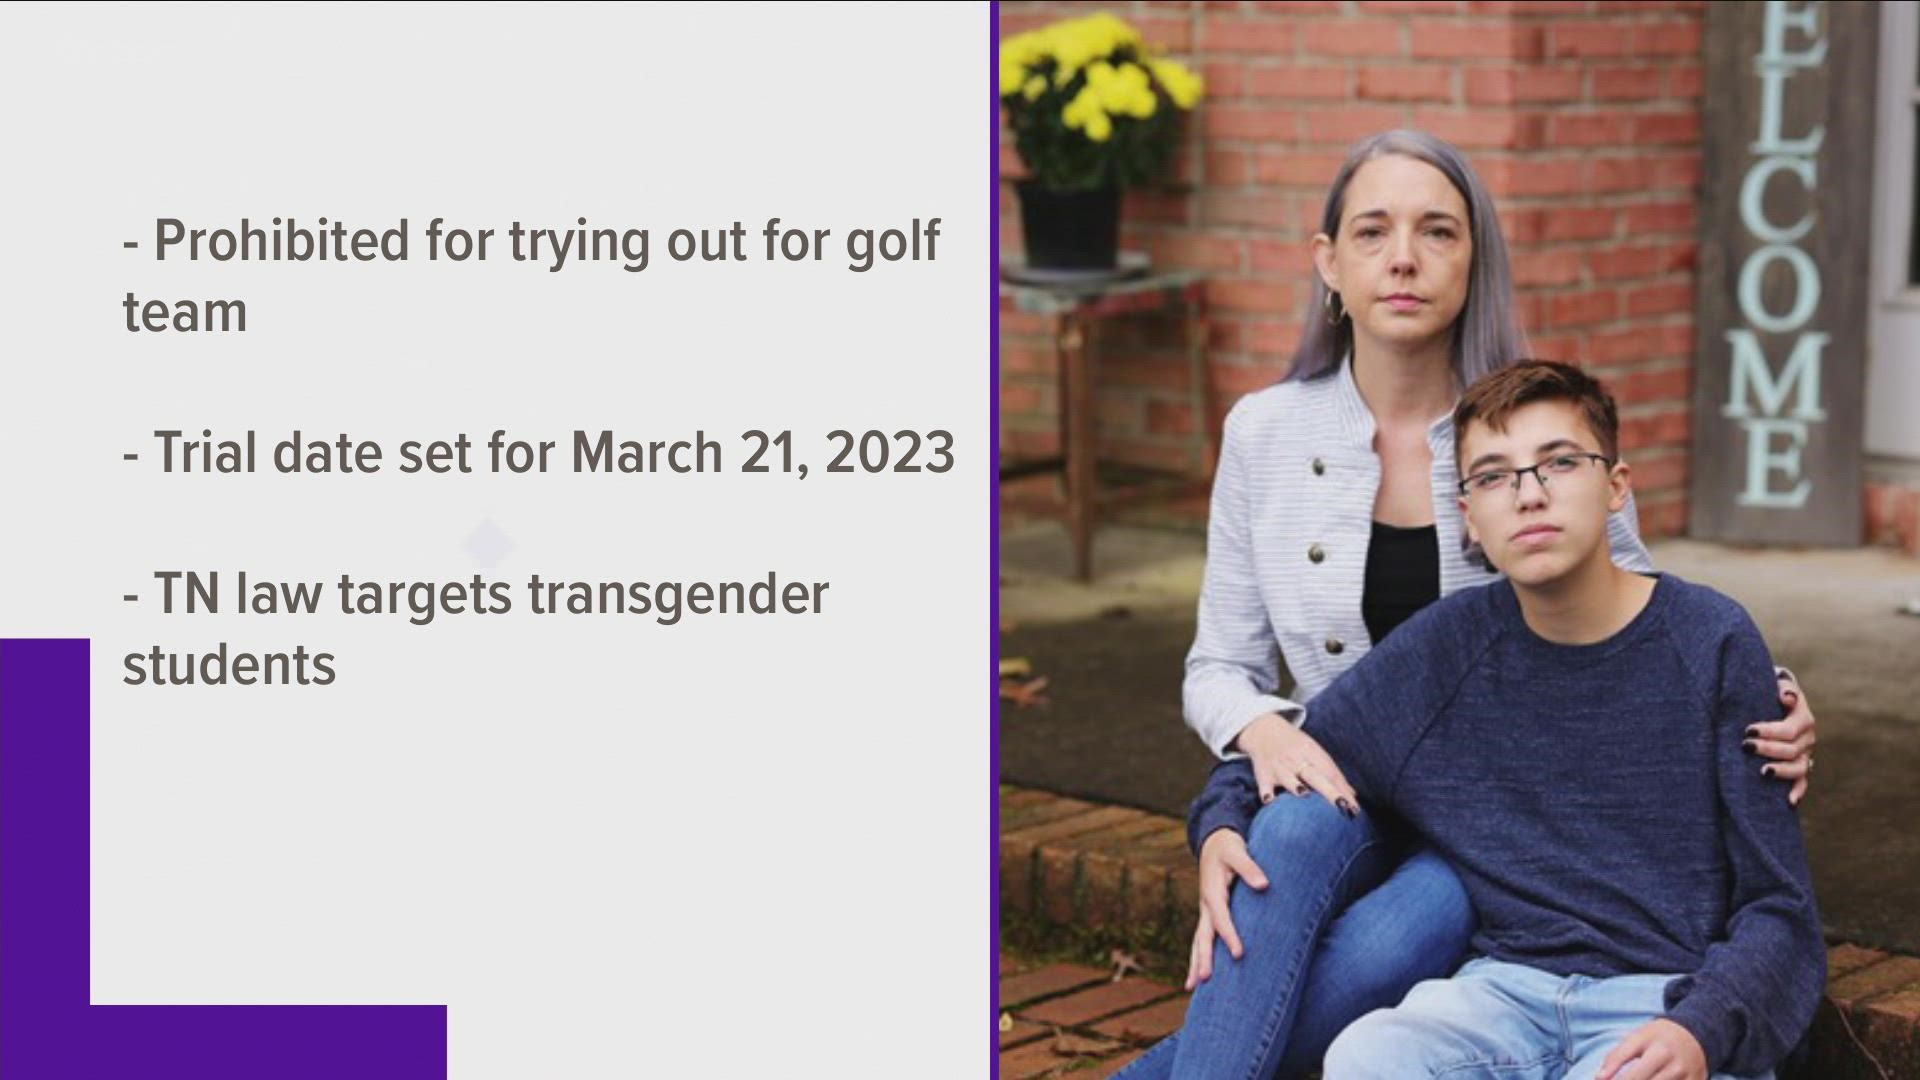 The trial will be on March 21, 2023. It was filed on behalf of a Farragut High School student who was excited to try out for his school's golf team.